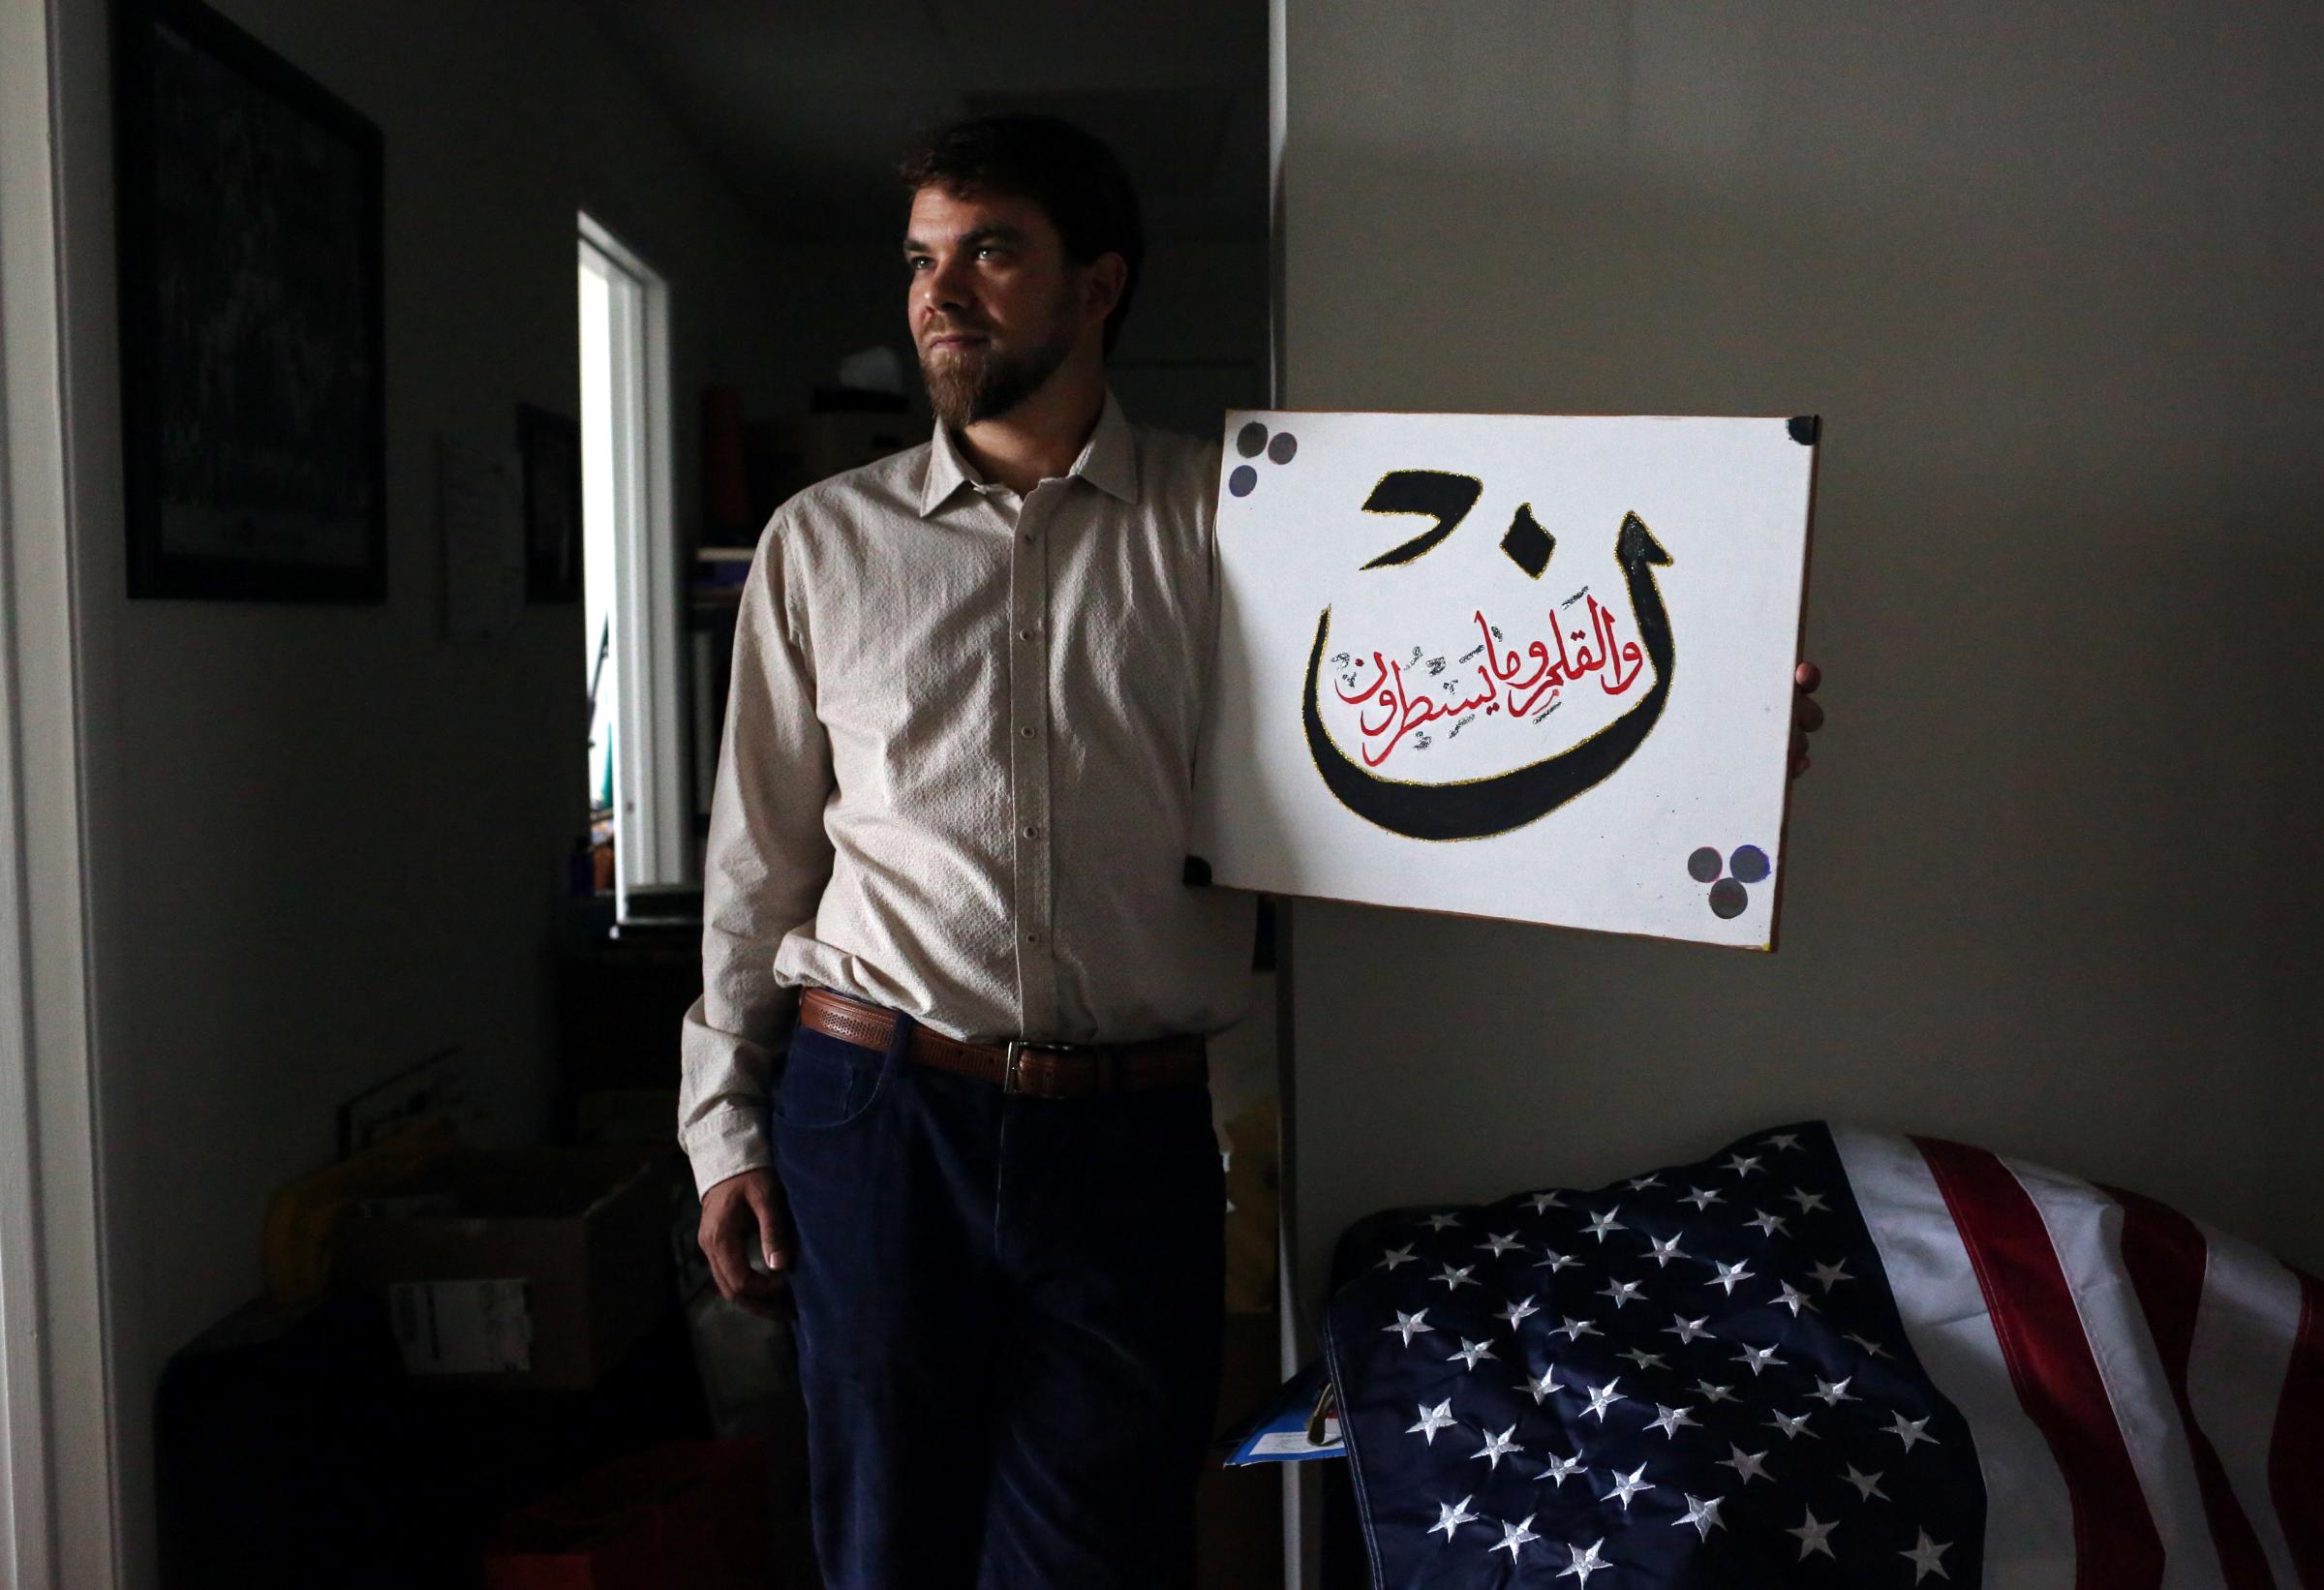 Adam Warshauer, 37, from Delray Beach, FL, whose father is Jewish and mother is a Christian, became a Sufi Muslim after being introduced to the faith by a man he met at 22. He is seen here posing for a portrait with a verse of the Koran, in a just-moved-into office space in Delray Beach, on March 12, 2016. He credits his background for being able to see connections between the three religions, and plans to start a YouTube show directly addressed to U.S. Presidential candidate Donald Trump (R-NY,) with the aim of creating peace between the Israel and Arab nations. It would feature a hand puppet called Uncle Musa - a relative to Moses, a prophet who appears in the Torah, Bible and Koran.Politically, he says he identifies most as an Independent: I believe in protecting the environment, and Republicans dont, which is why I am not Republican. Warshauer plans to support Trump, however, especially if he wins Tuesdays primary elections and goes on to become the Republican nominee for president. Warshauer says he does not believe Trump wants to ban Muslims from entering the country because of a dislike for them, but because he wants to solve terrorism. Most are outraged at Trump saying he wants to ban Muslims from entering America, but I support that as a Muslim person, because we have to stop what is happening and work with other Muslim countries to stop terrorism. If you stop Muslims from entering the country, it forces everyone to look at the problem. He adds that Isis killings are ruining the face of Islam. Who wants to become Muslim when it is associated with terrorism?People pull stuff they want to go Oh, my God! about, but come on, forget about that and just focus on what's real, which Warshauer says is Trumps job creation capability and his focus on stopping the drug epidemic in America, heroin specifically. He adds that Trump is more approachable than other Republican candidates like Ted Cruz (R-TX) and Marco Rub